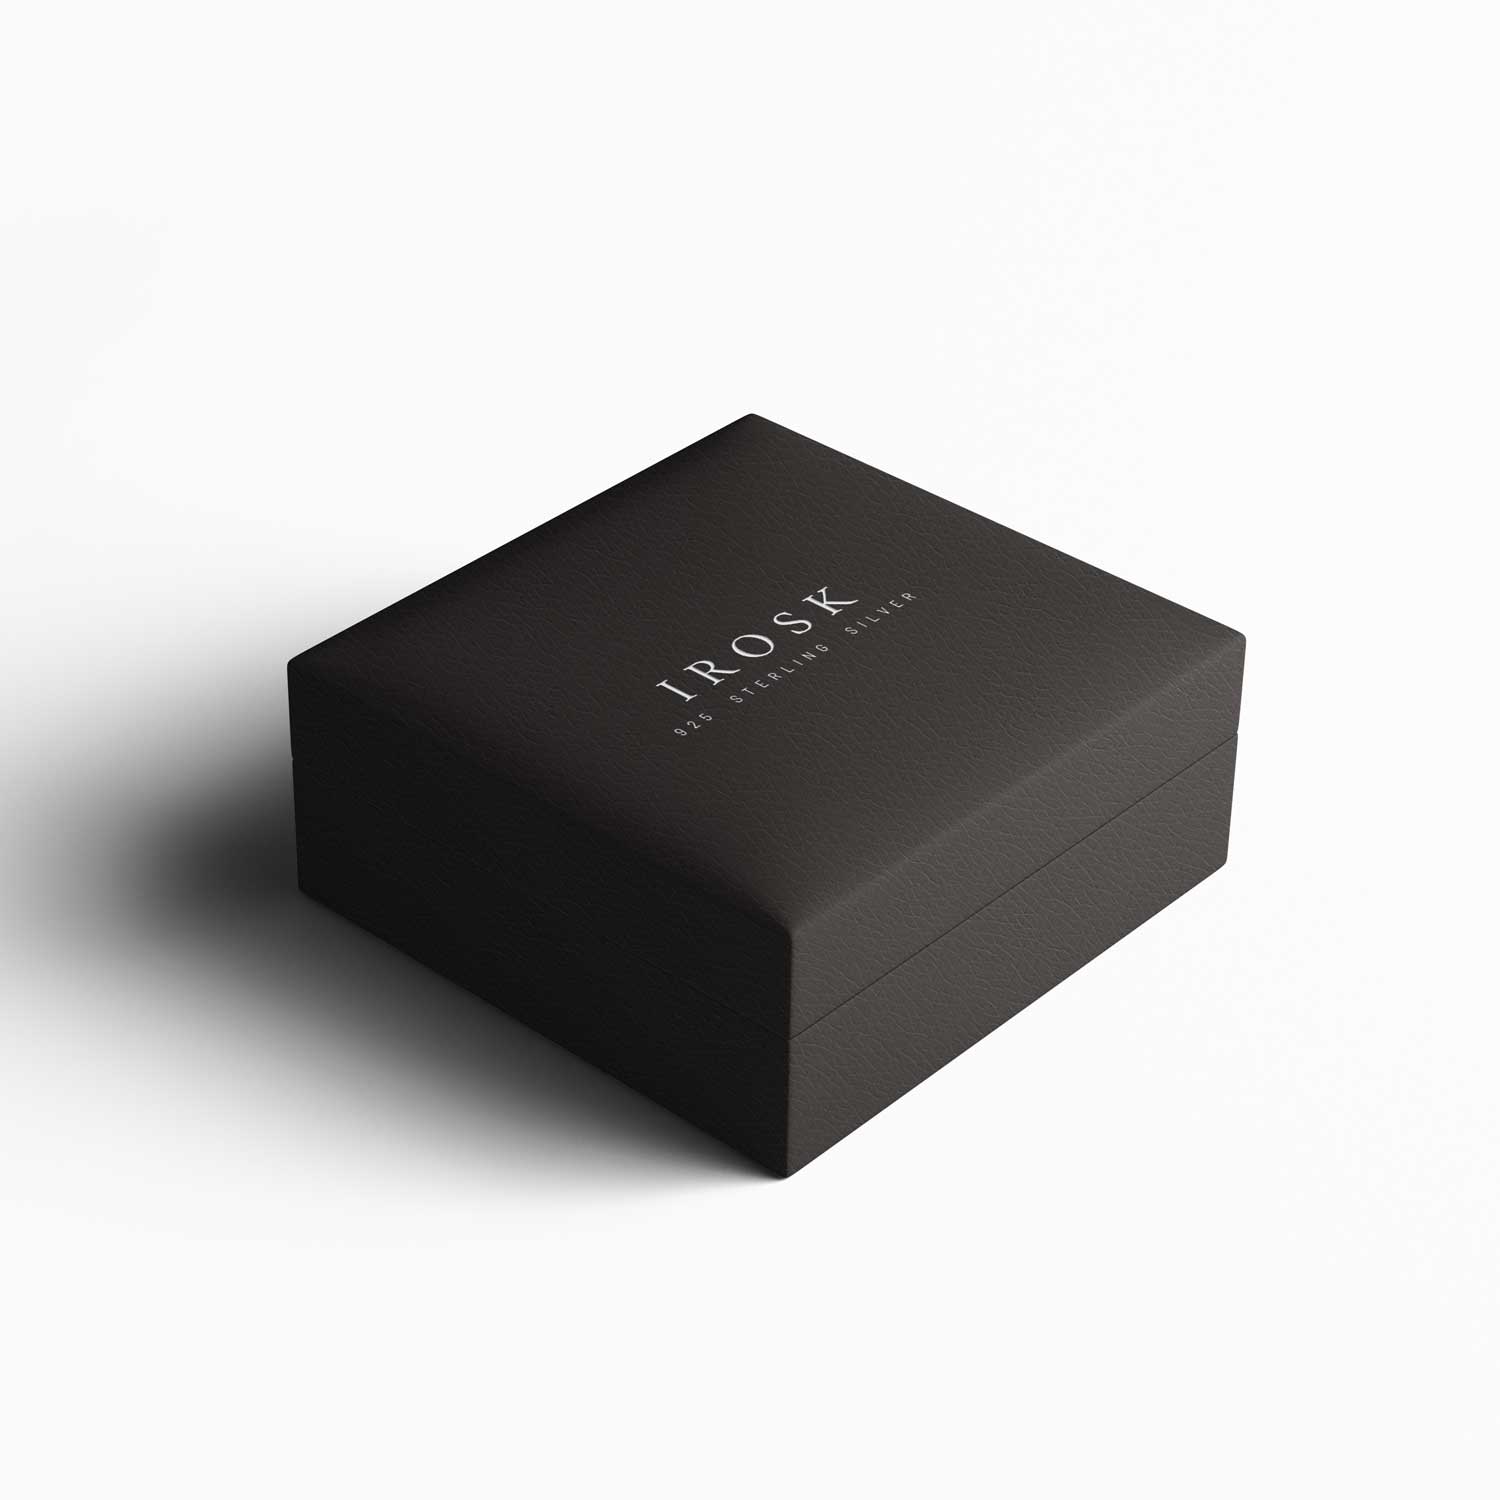 Irosk jewellery box, adding a touch of luxury to the Irosk Inscribe Elegance Ring, providing secure and stylish storage for this elegant and customizable jewellery piece.